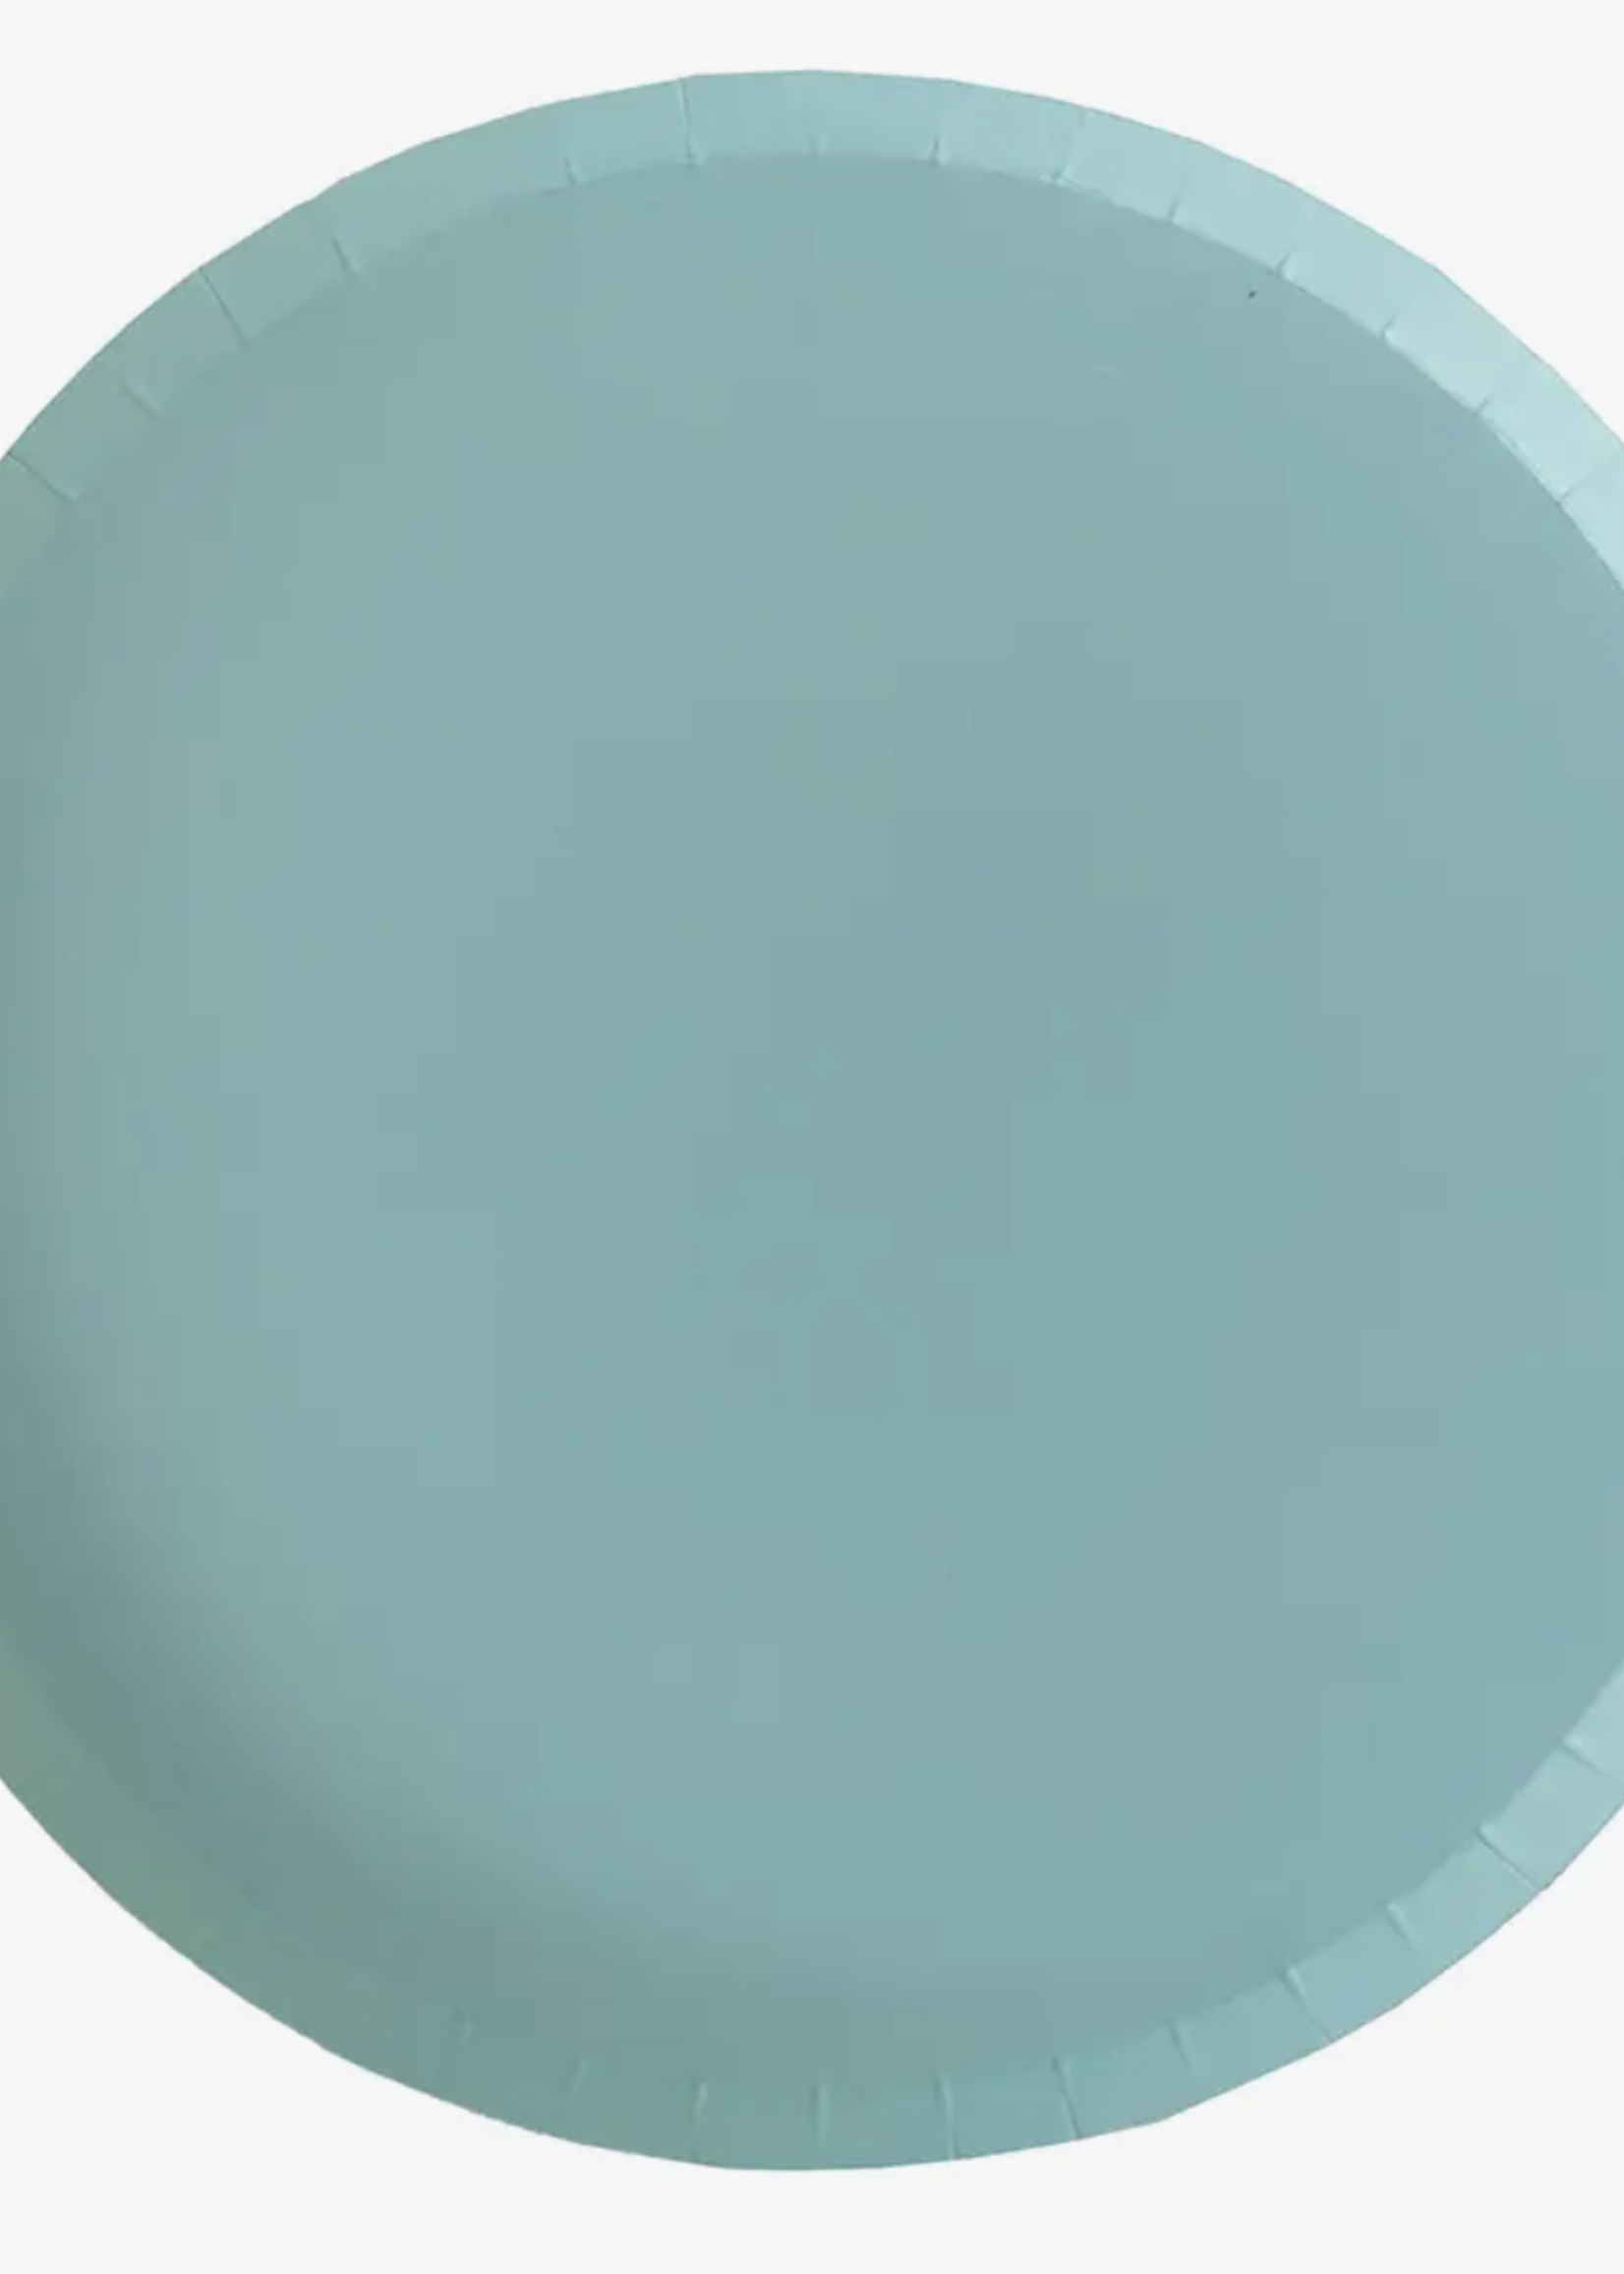 Creative Twist Events Shade Collection Seafoam Dinner Plates - 8 Pk.